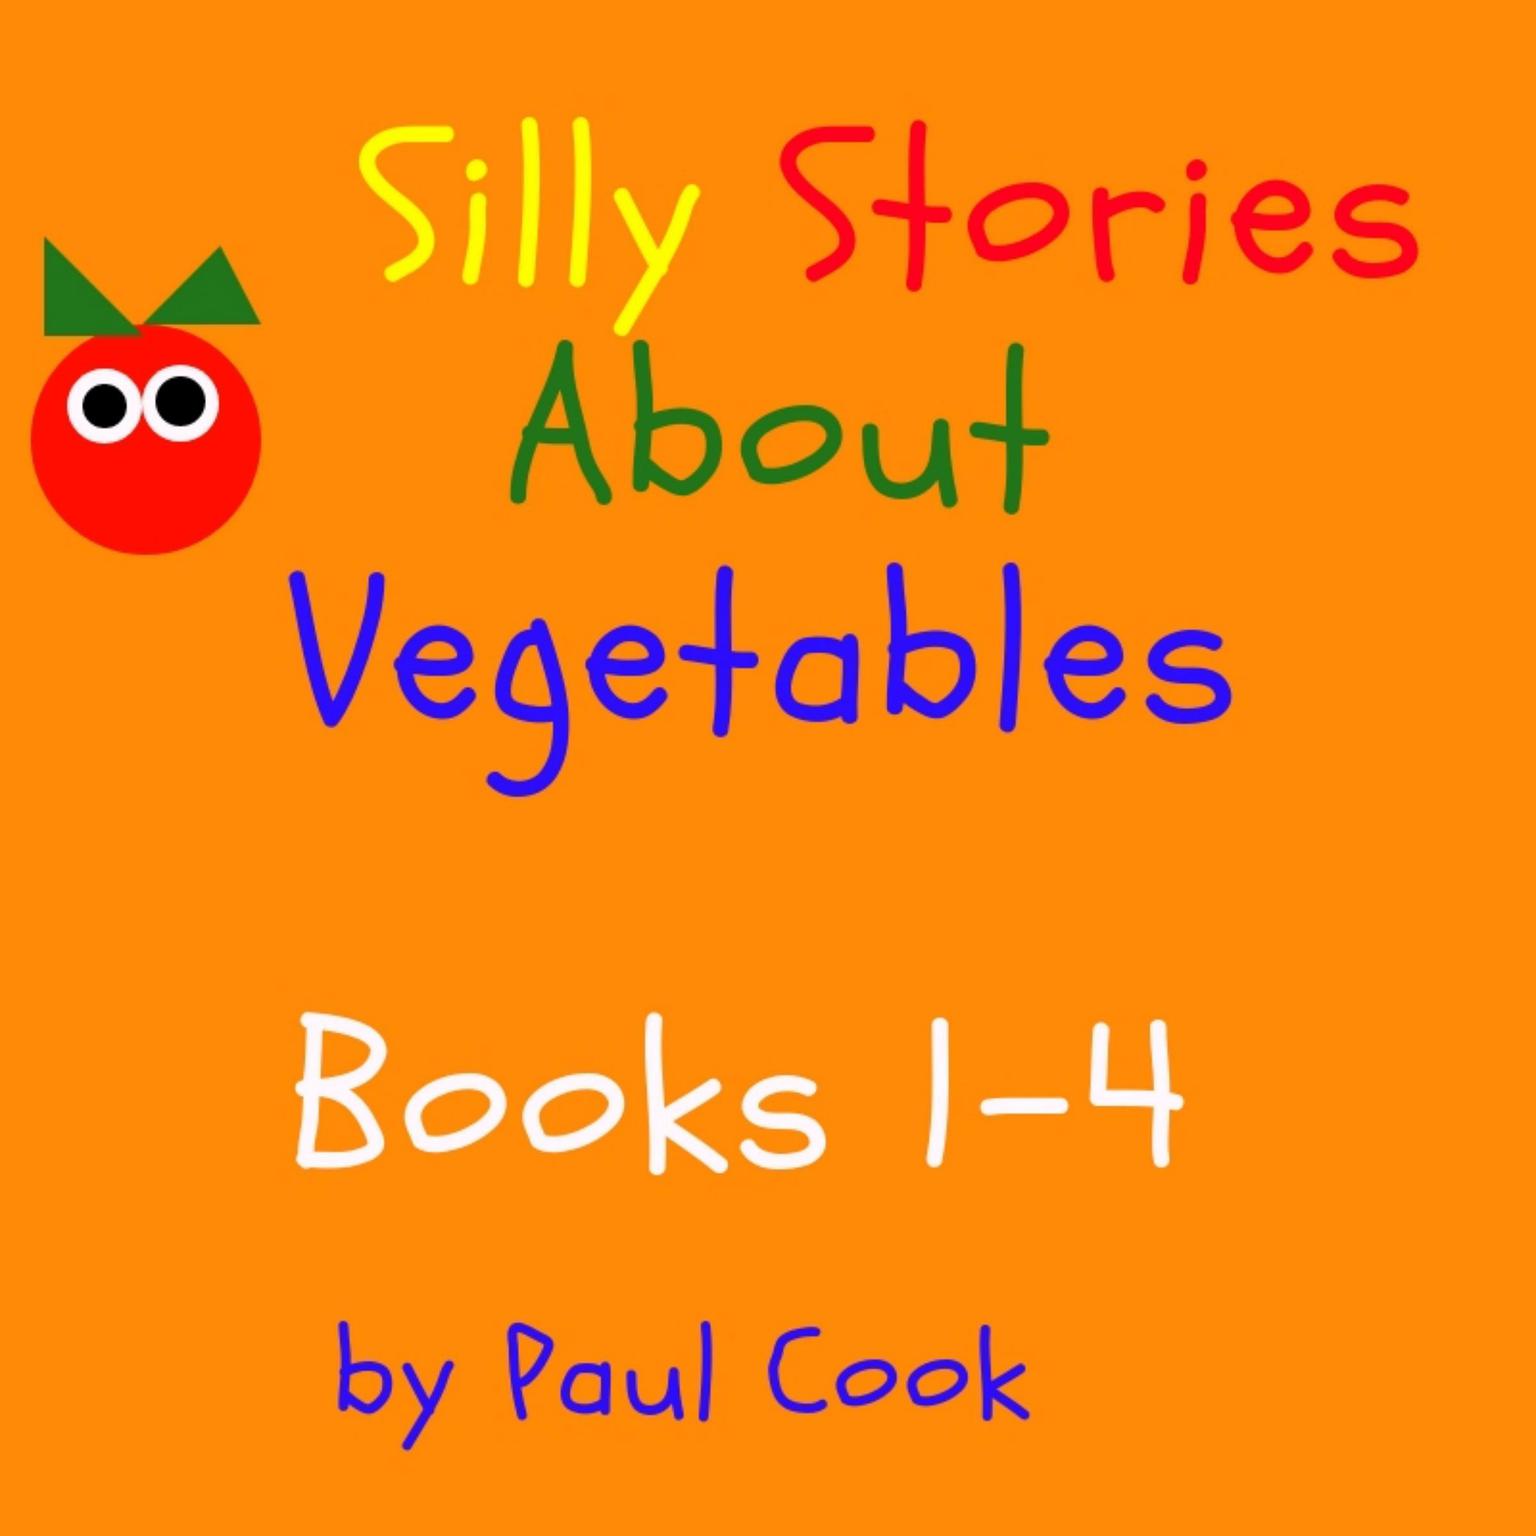 Silly Stories About Vegetables Books 1-4 Audiobook, by Paul Cook